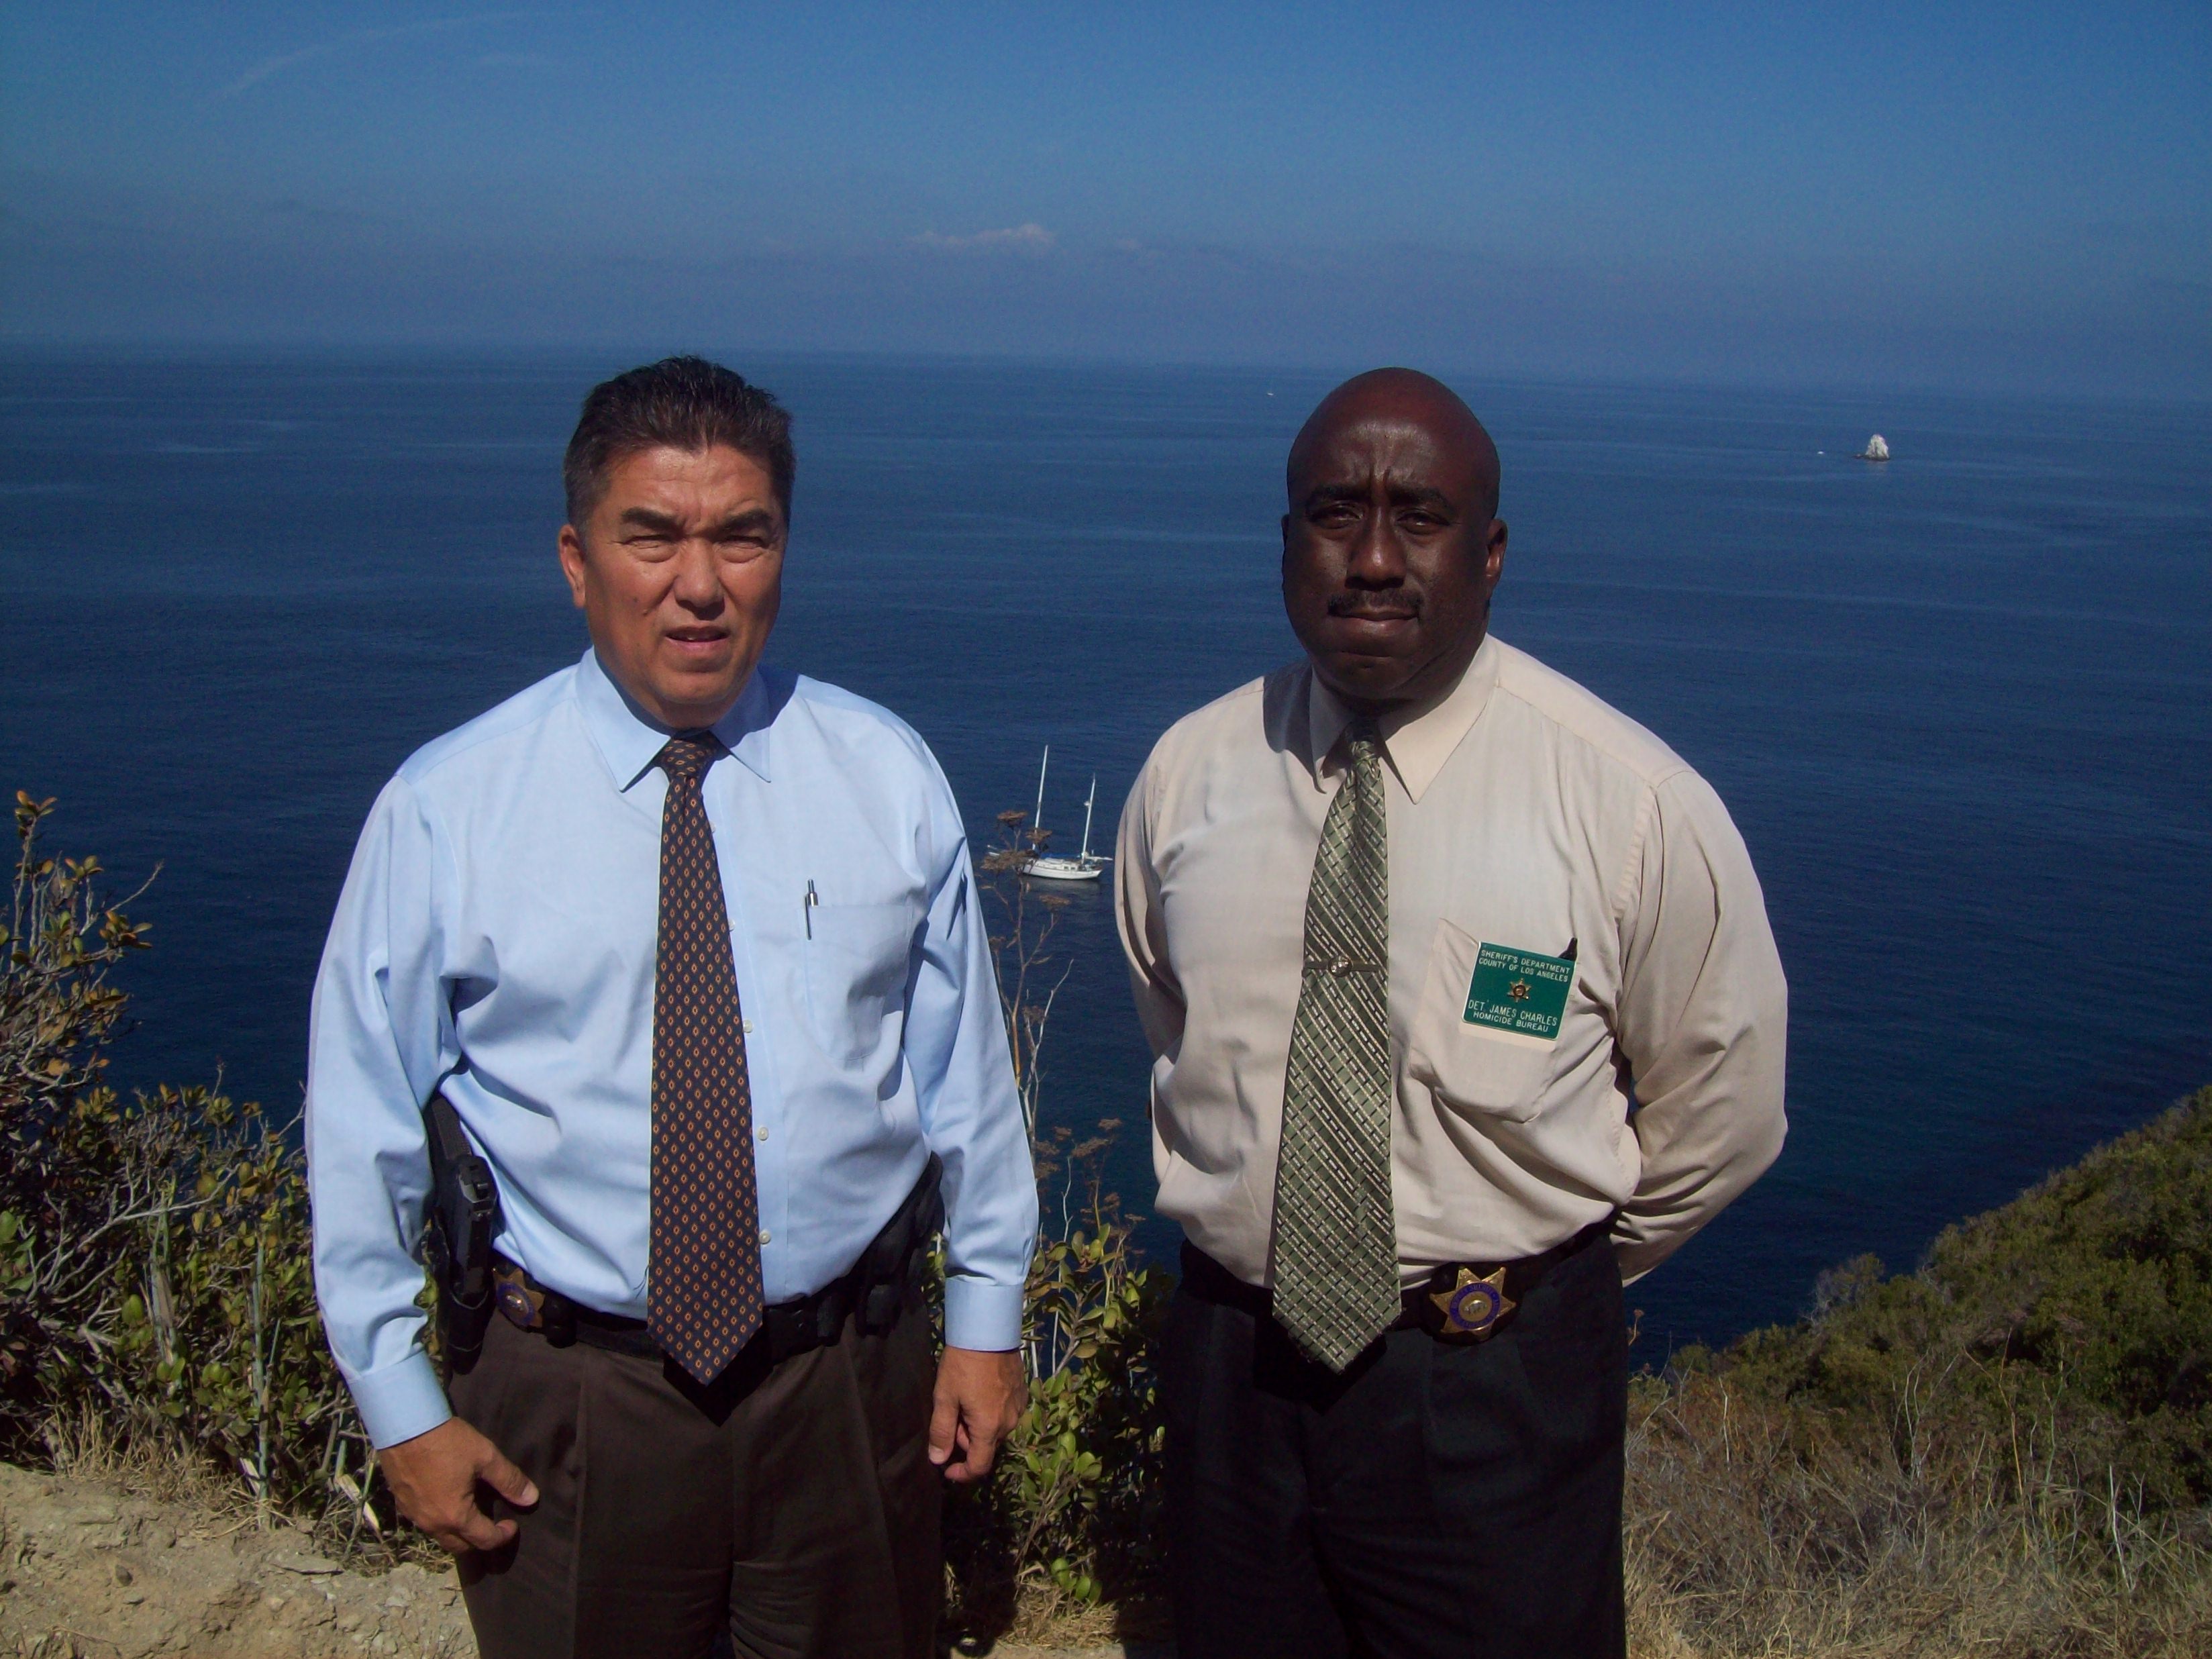 Jim and I working a case on Catalina Island.